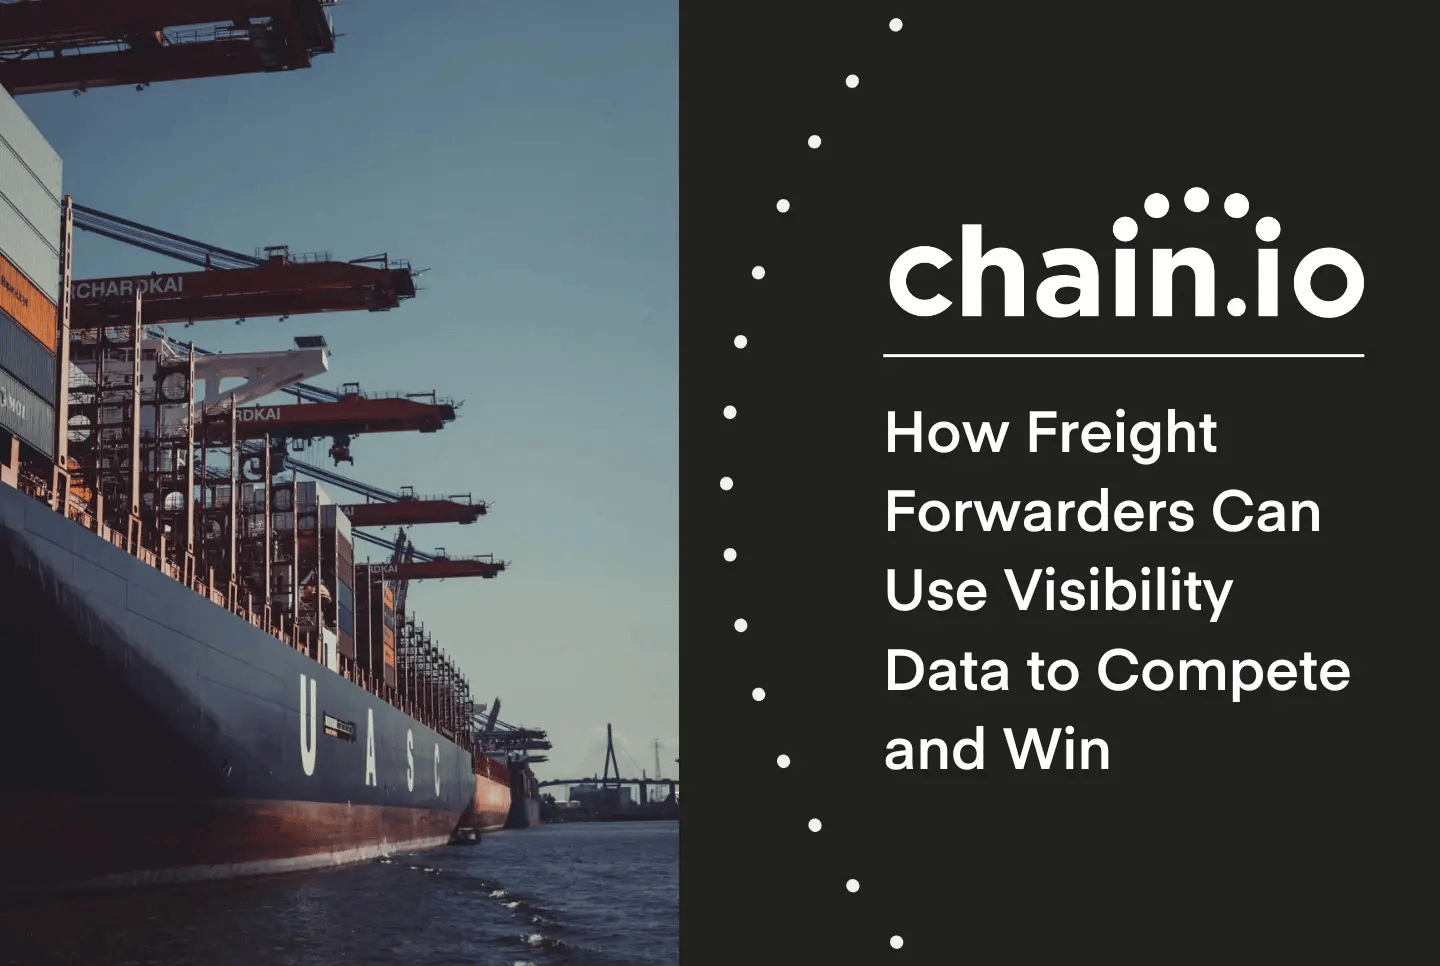 Busy port along with the text "how freight forwarders can use third-party visibility data to compete and win."